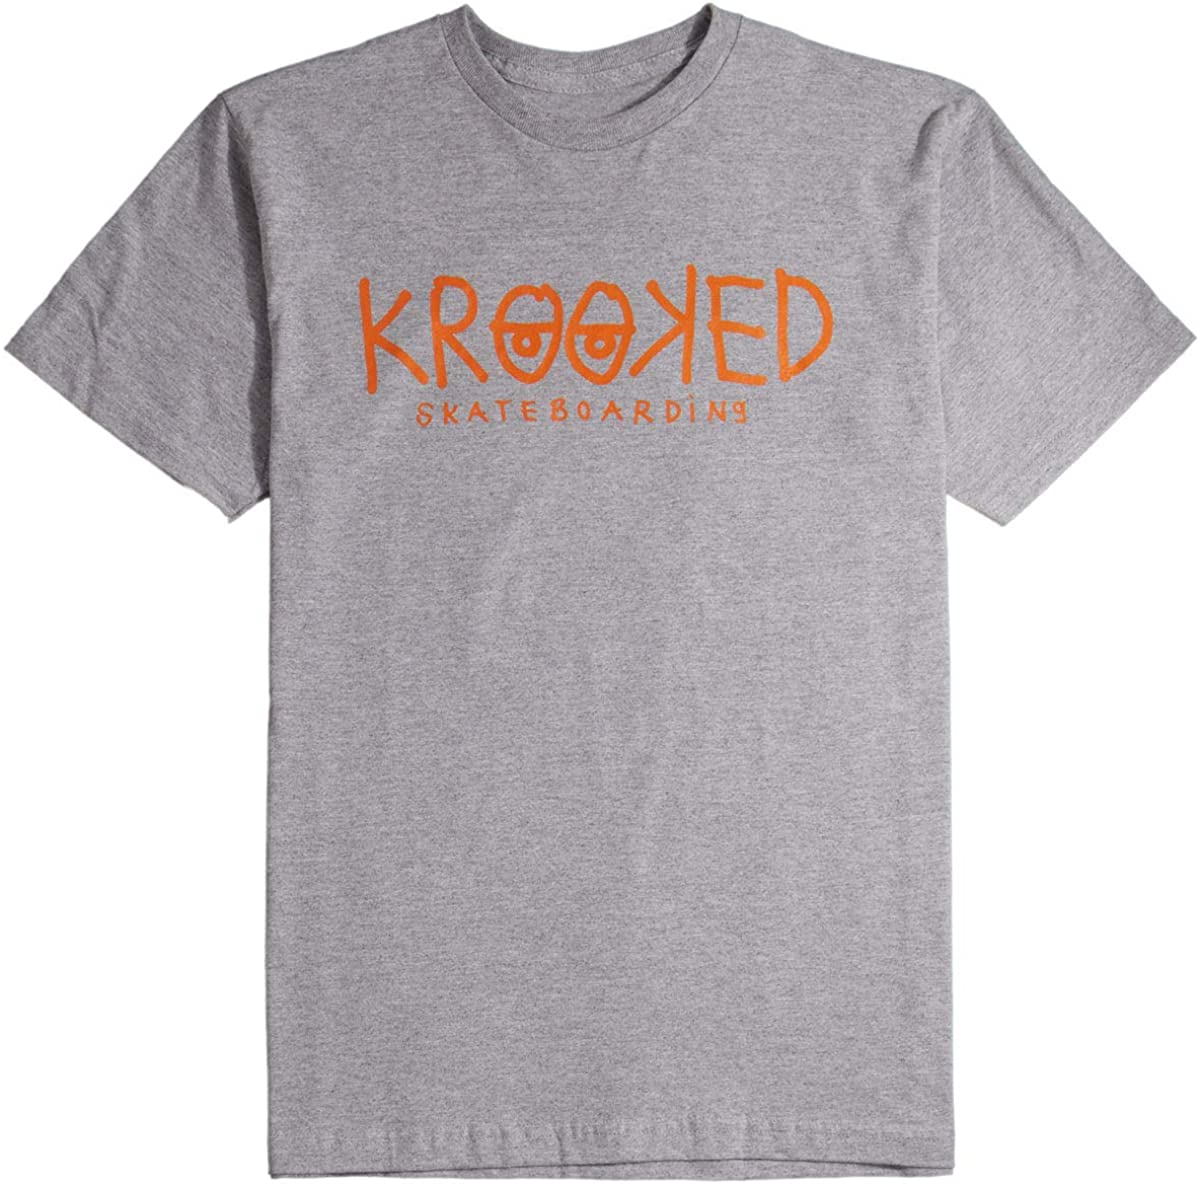 Krooked Eyes S/S Tee Shirt Ash/Red (size options listed)